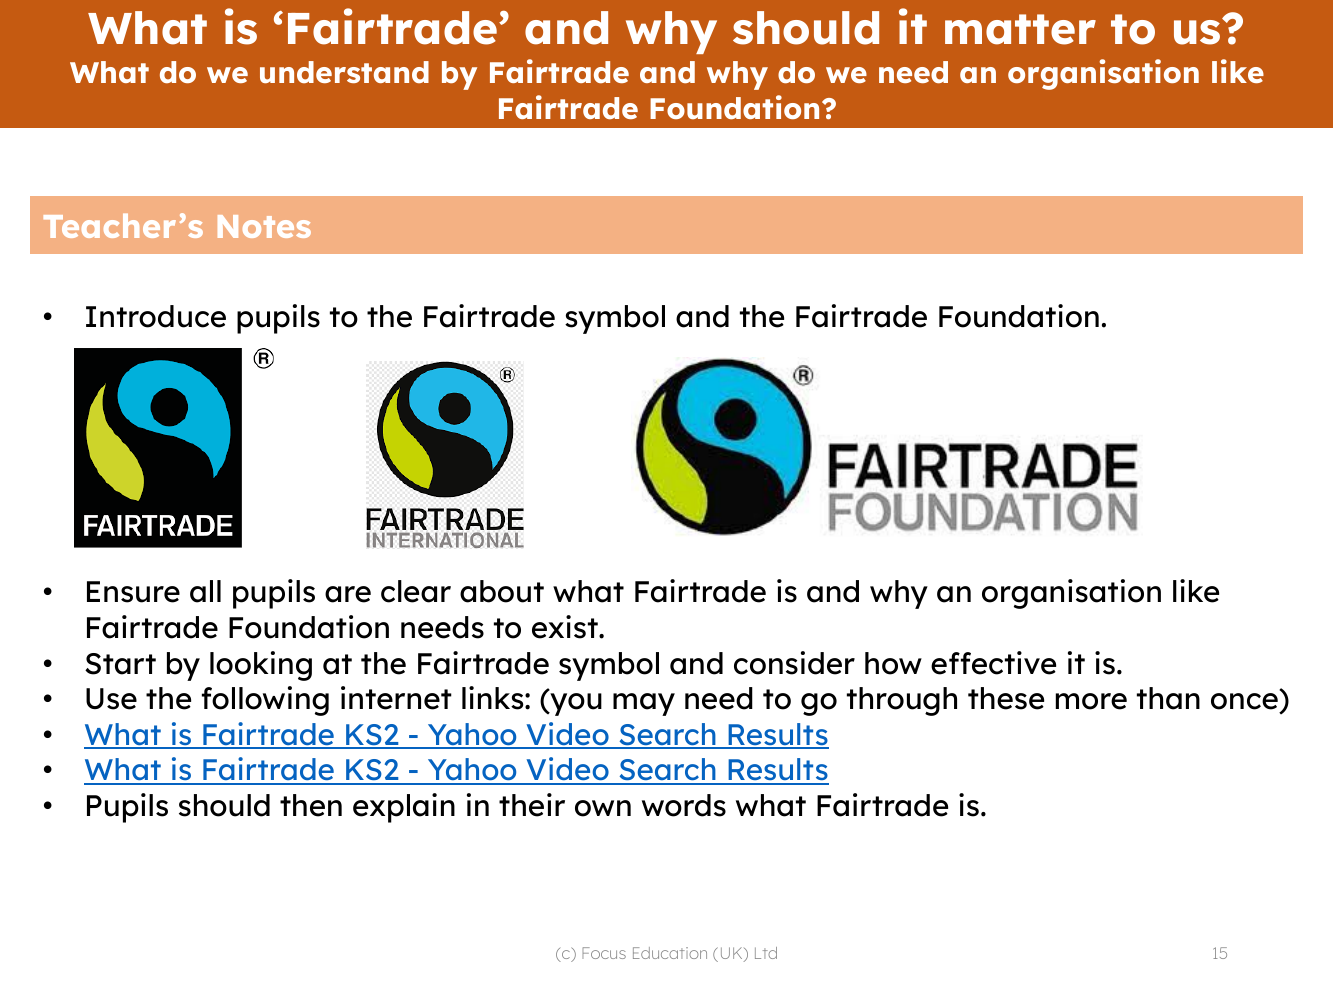 What do we understand by Fairtrade and why do we need an organisation like Fairtrade Foundation? - Teacher notes